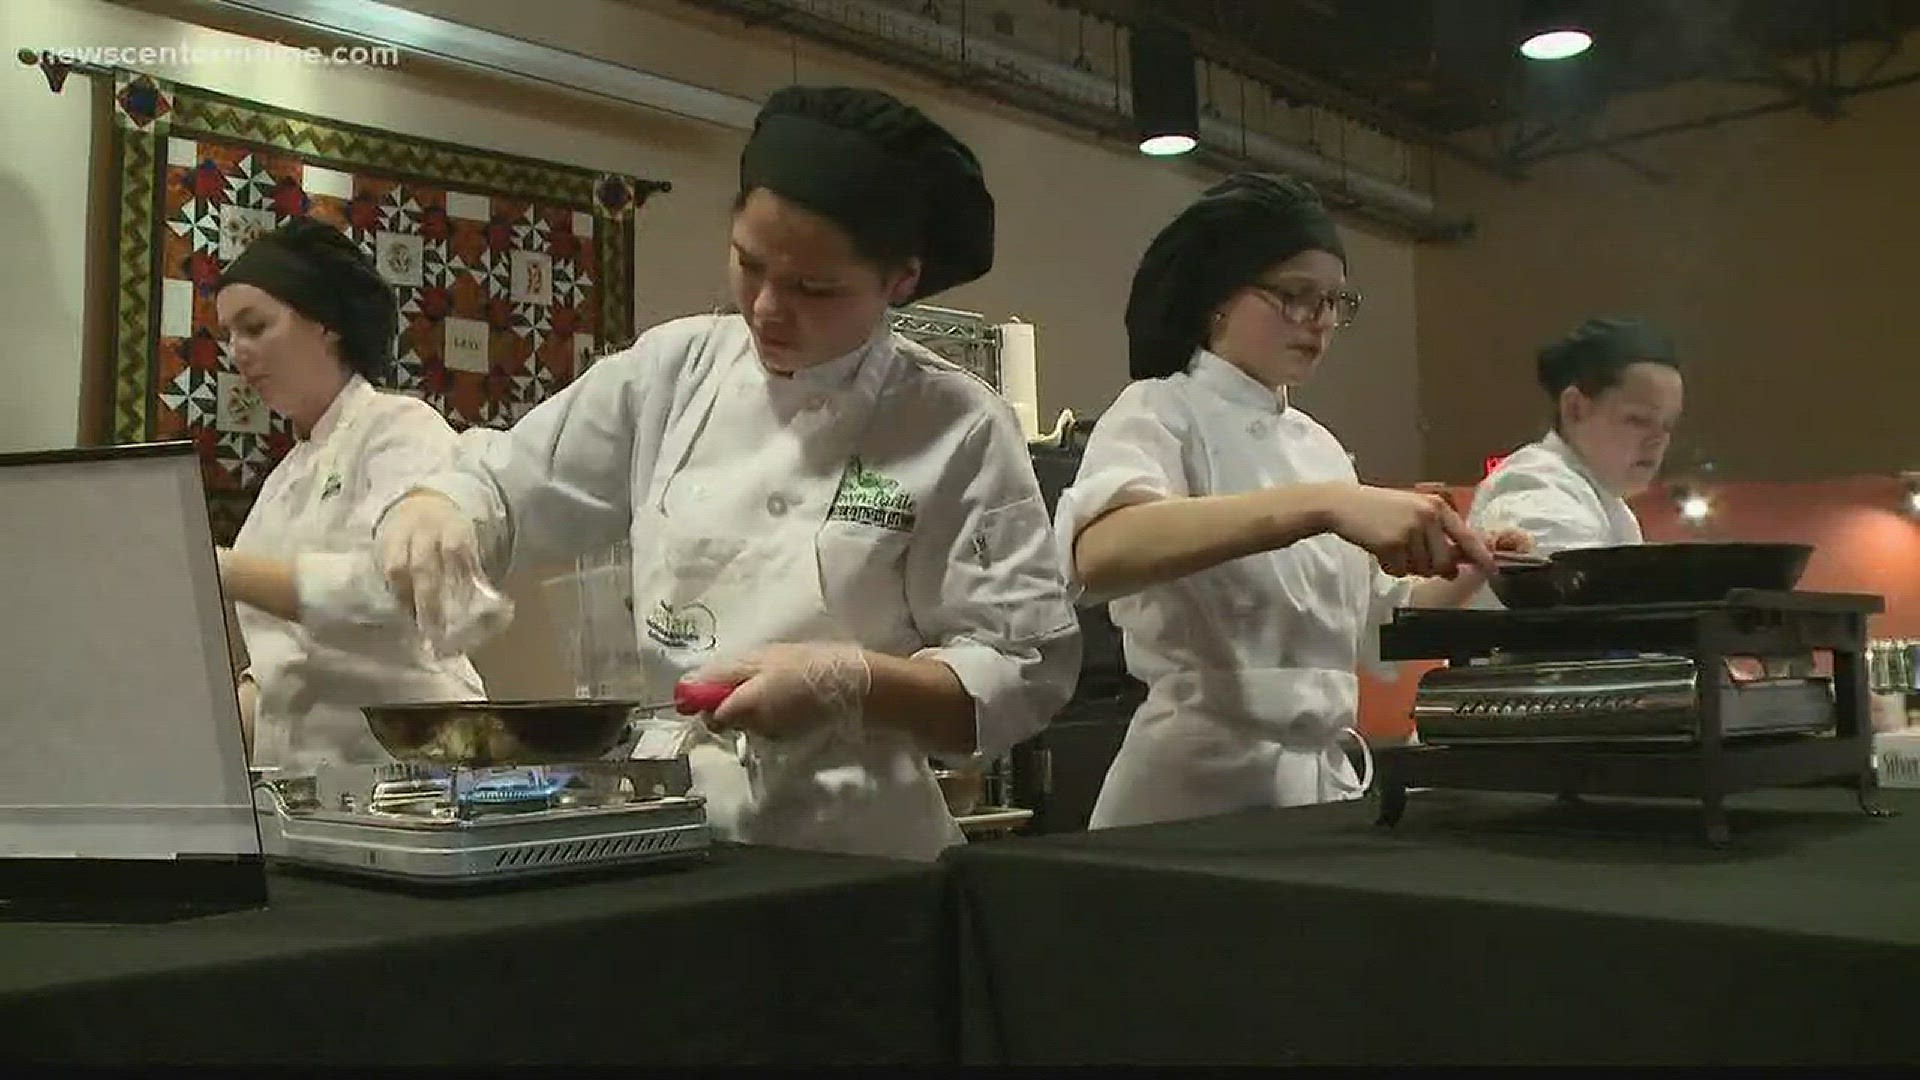 ProStart Invitational Culinary Competition is teaching our youth to cook.